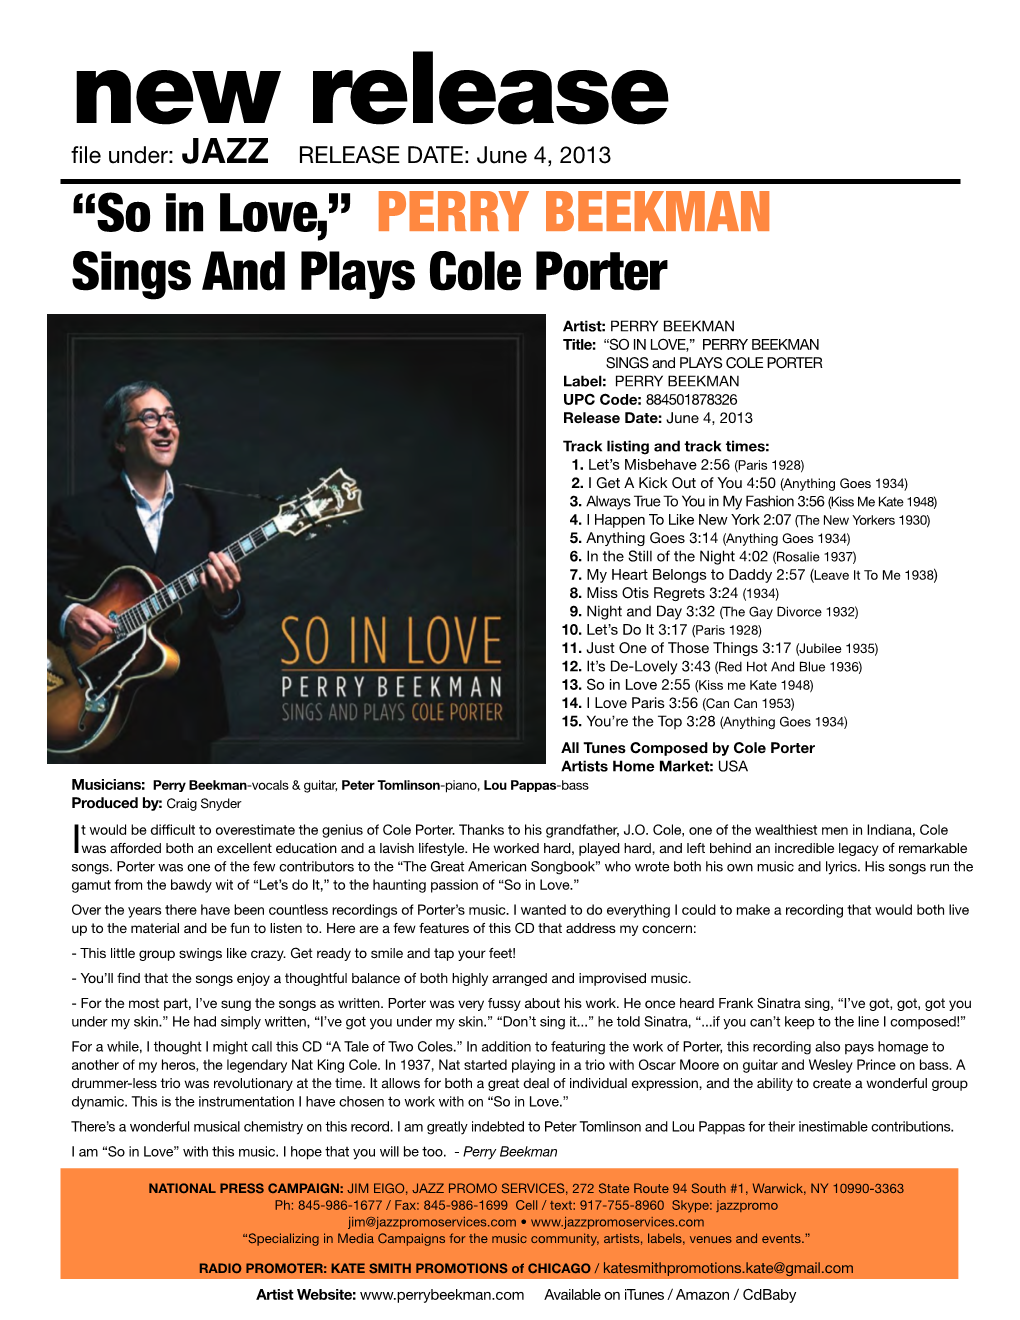 “So in Love,” Perry Beekman Sings and Plays Cole Porter